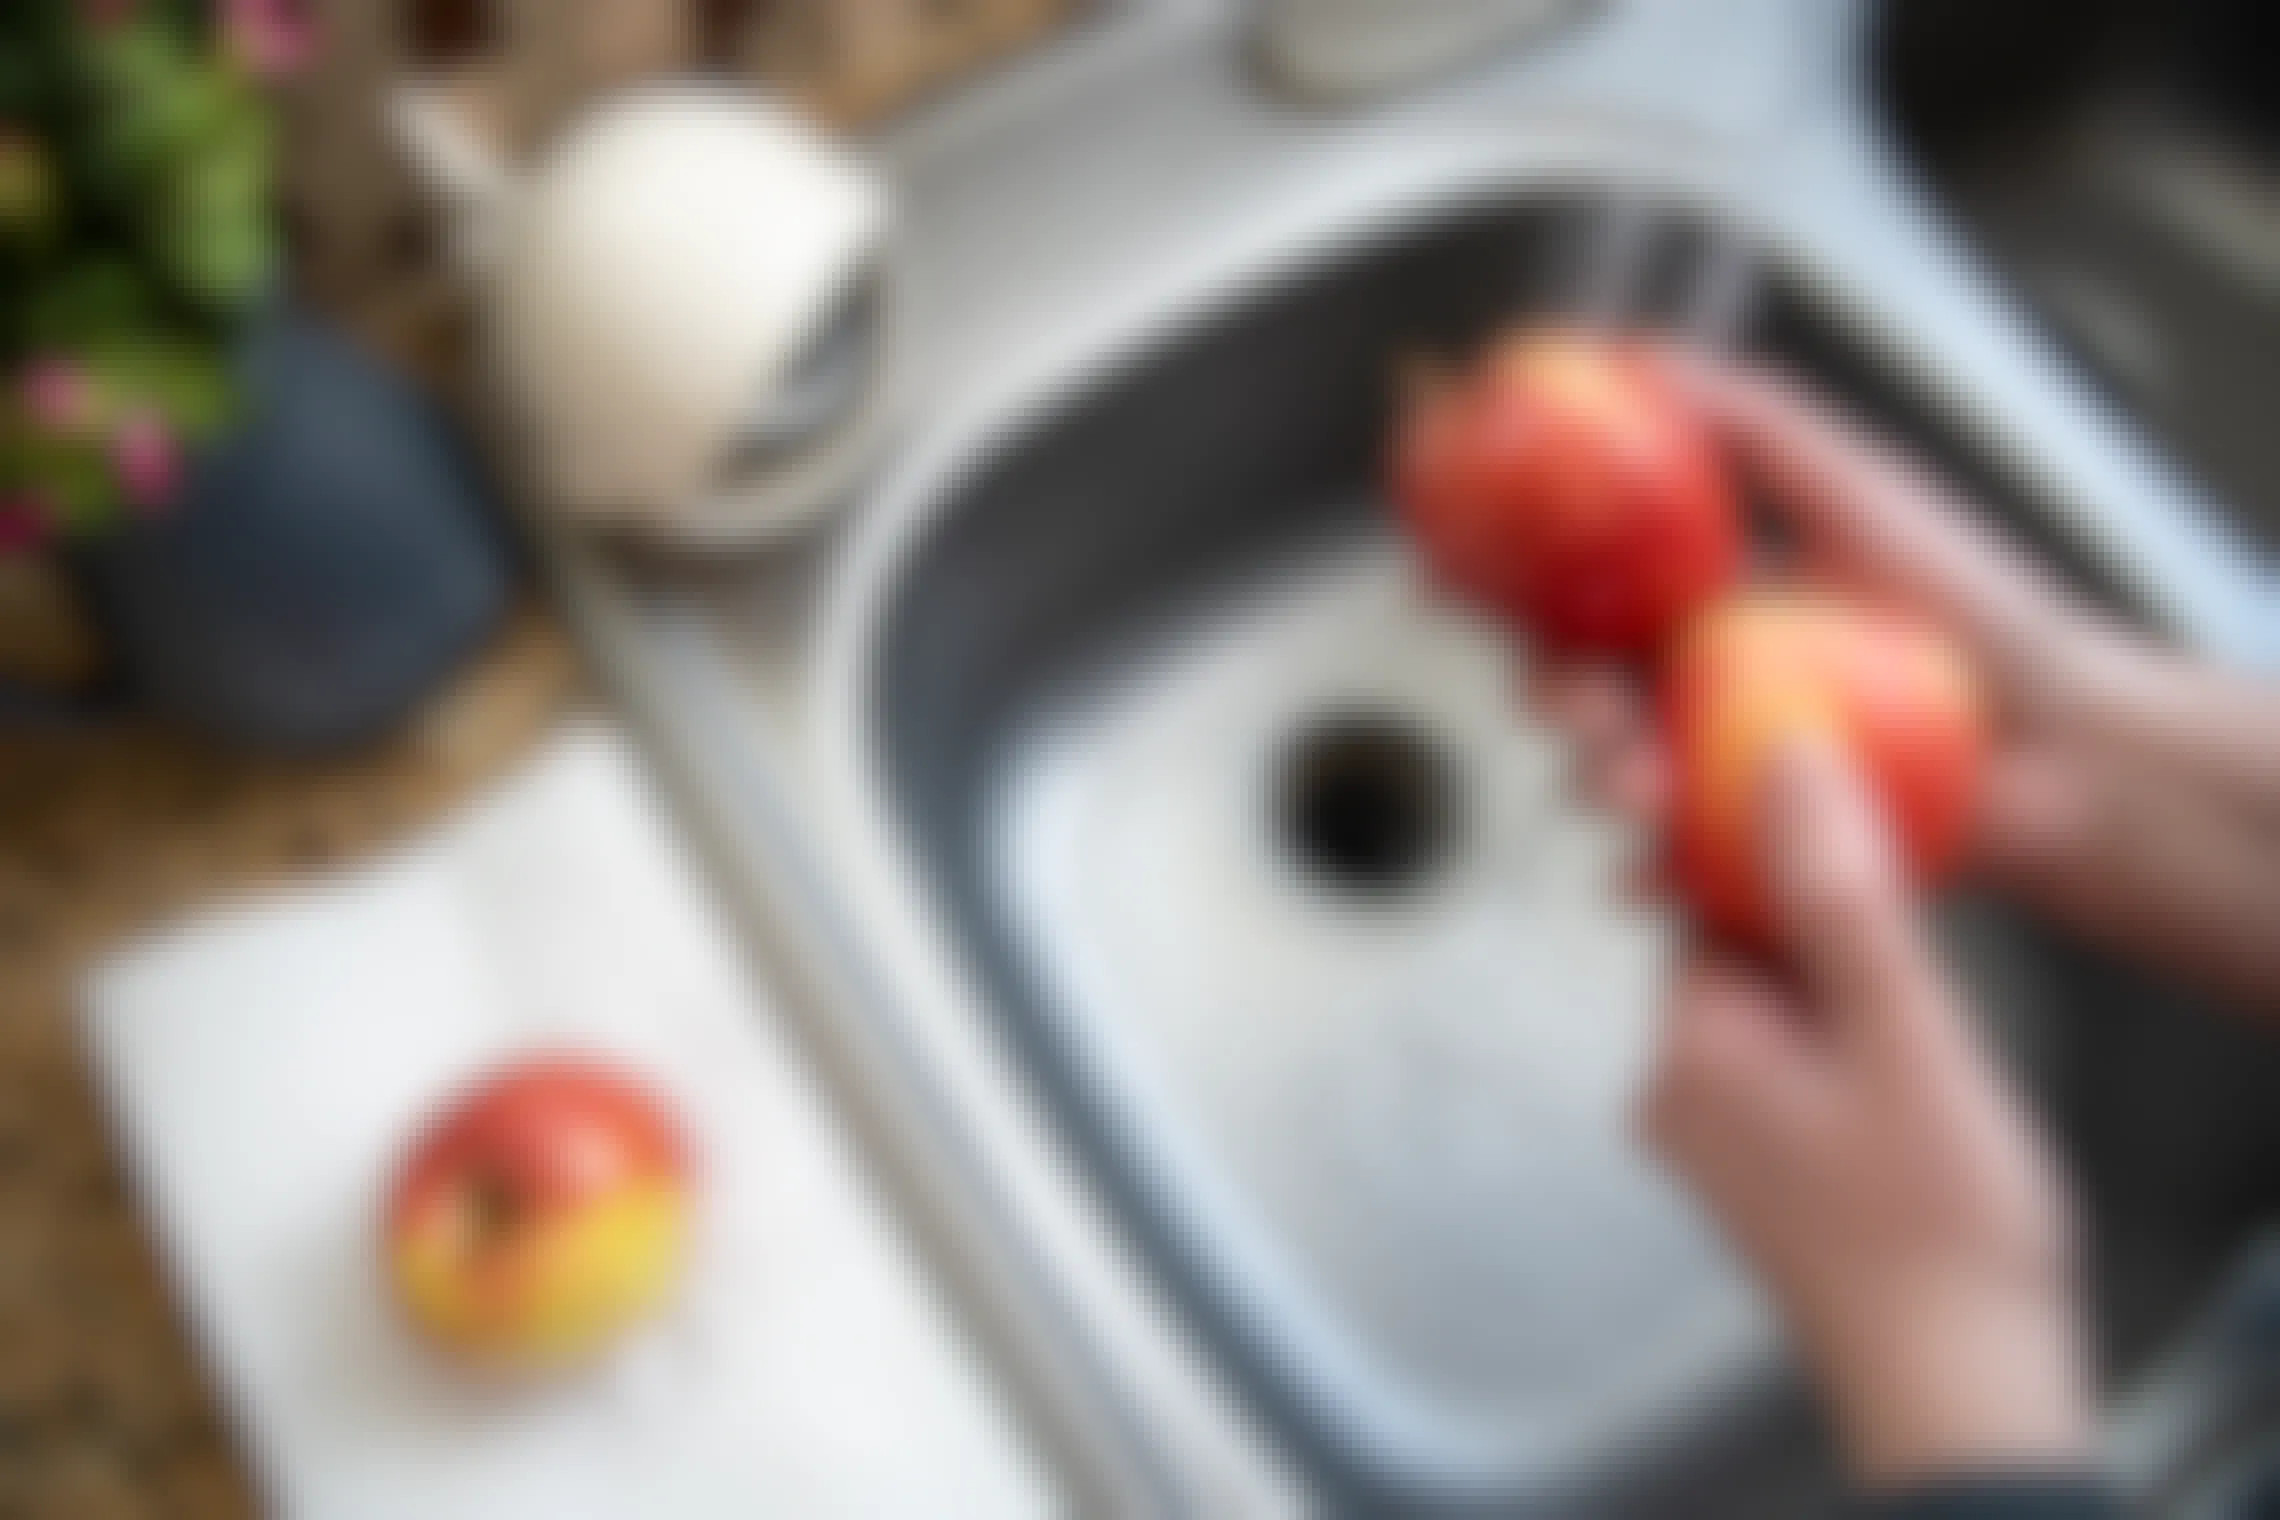 Two apples being washed over a kitchen sink with a third sitting on paper towel next to it.